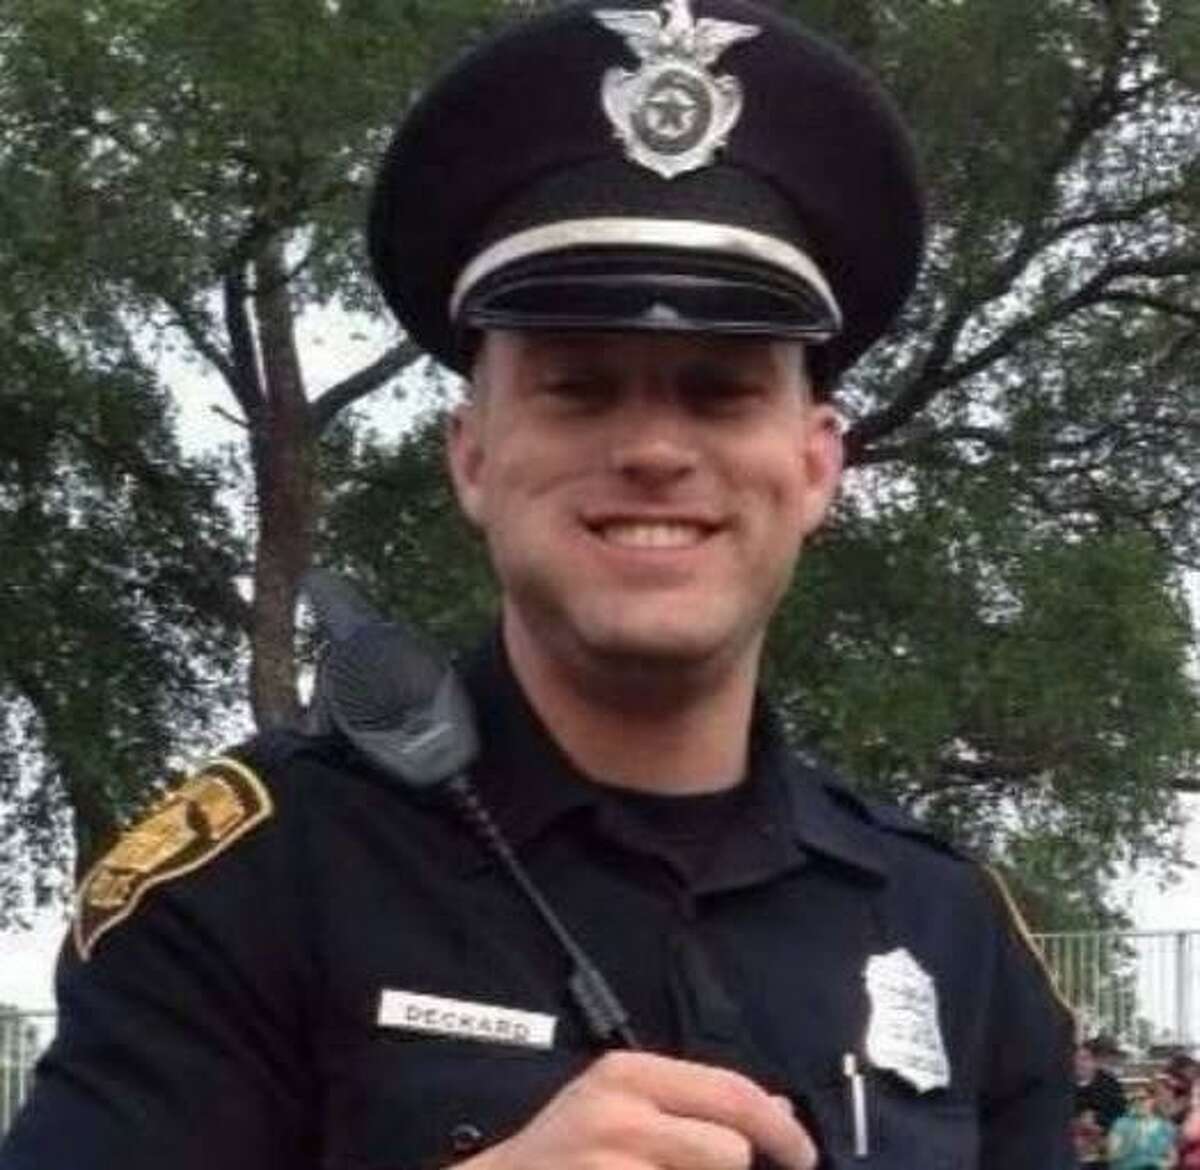 San Antonio Police Officer Bobby Deckard died Dec. 20, 2013, from wounds he suffered after being shot in the head Dec. 8 while pursuing armed robbery suspects.